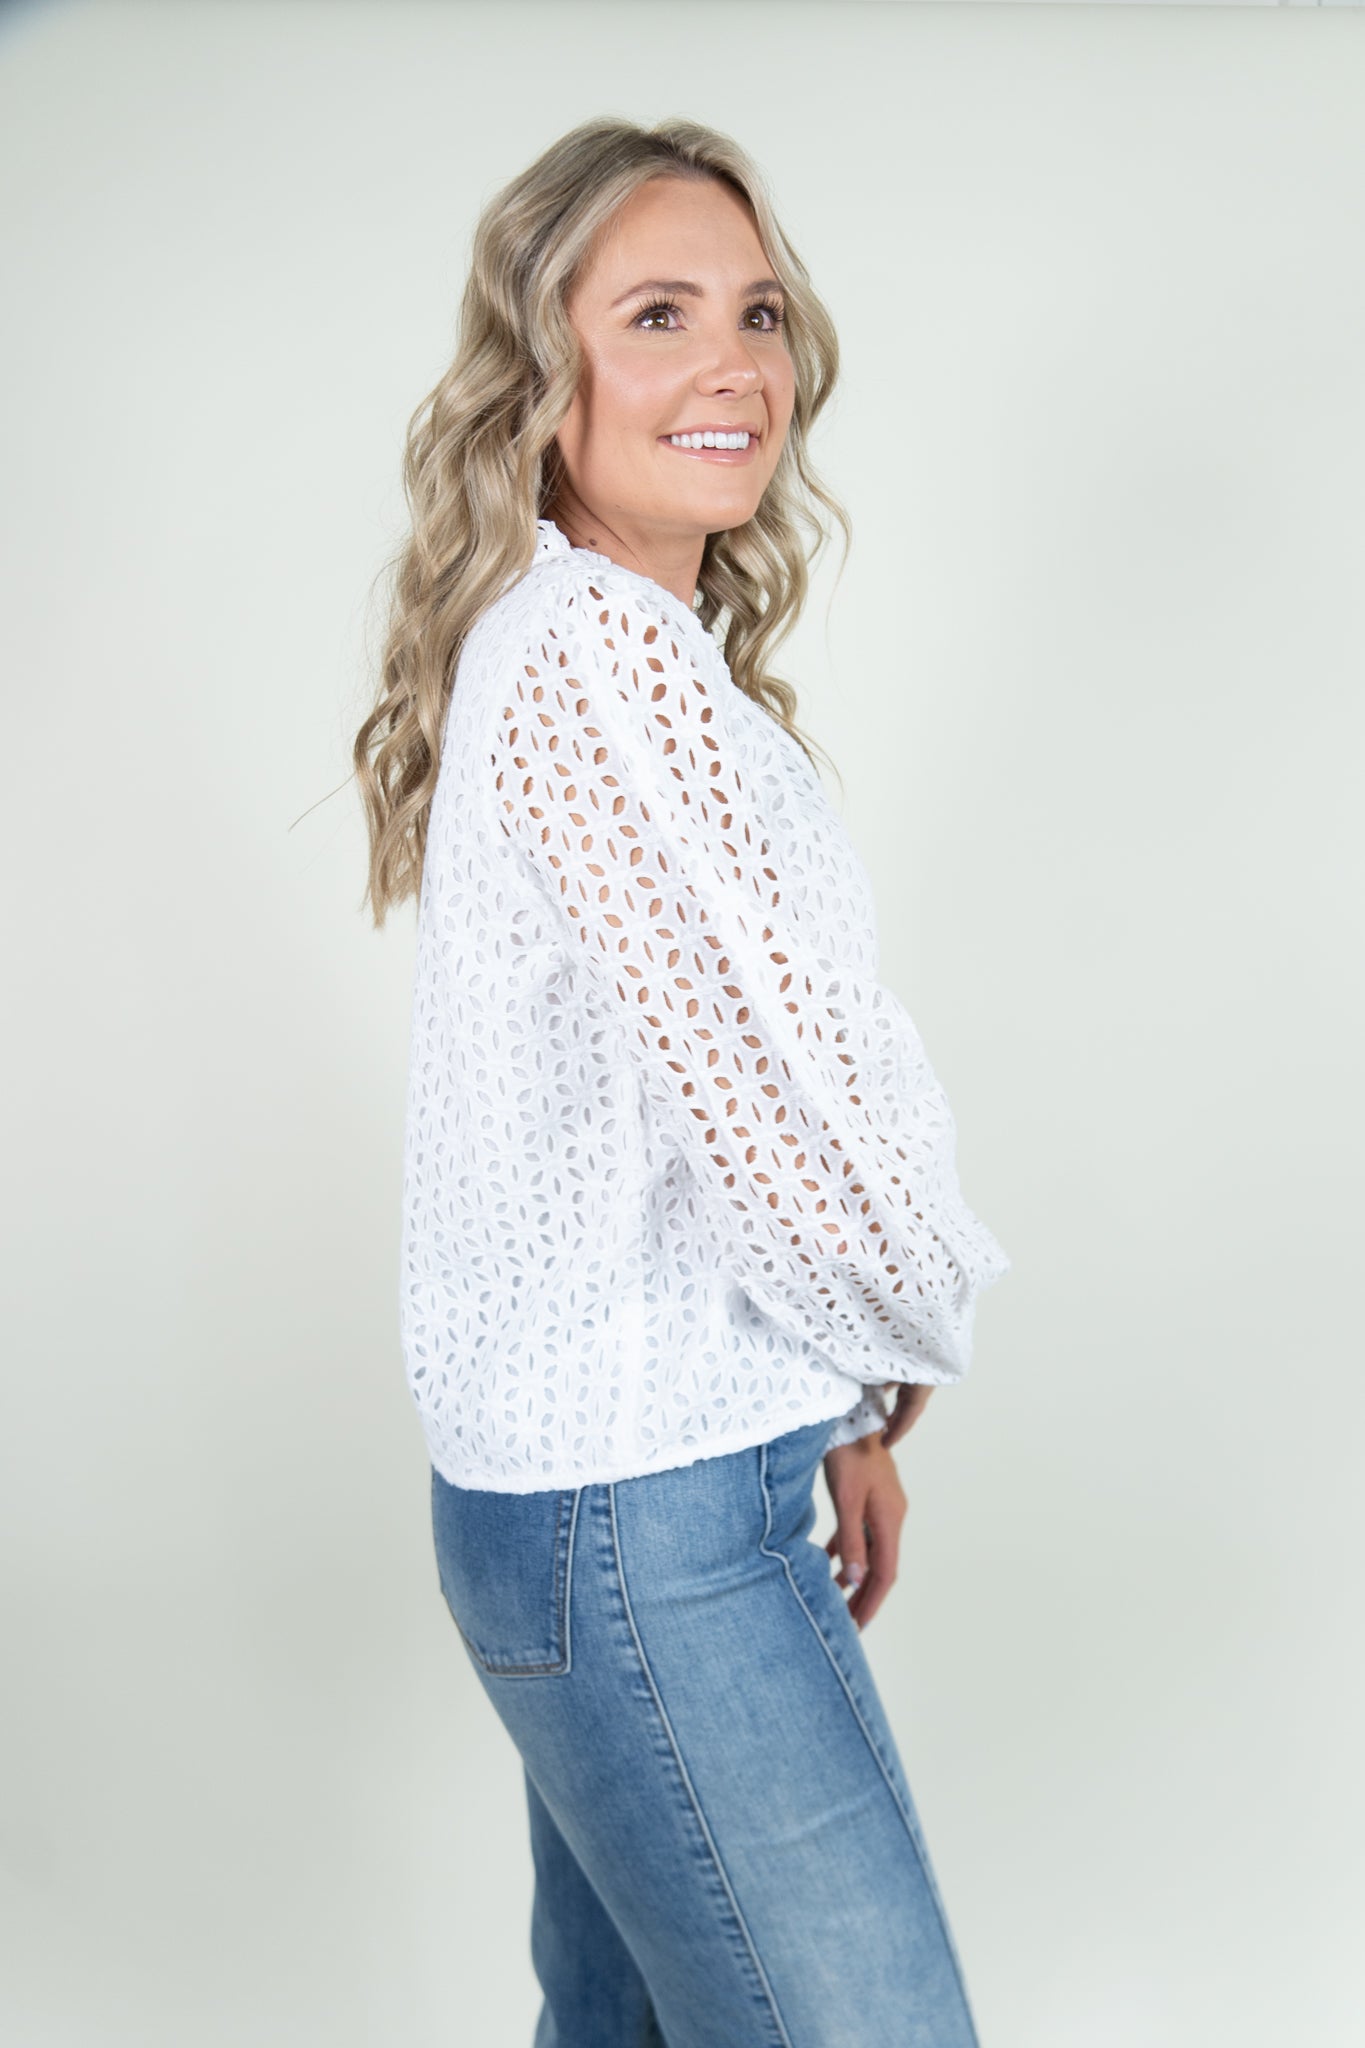 The Thea Top